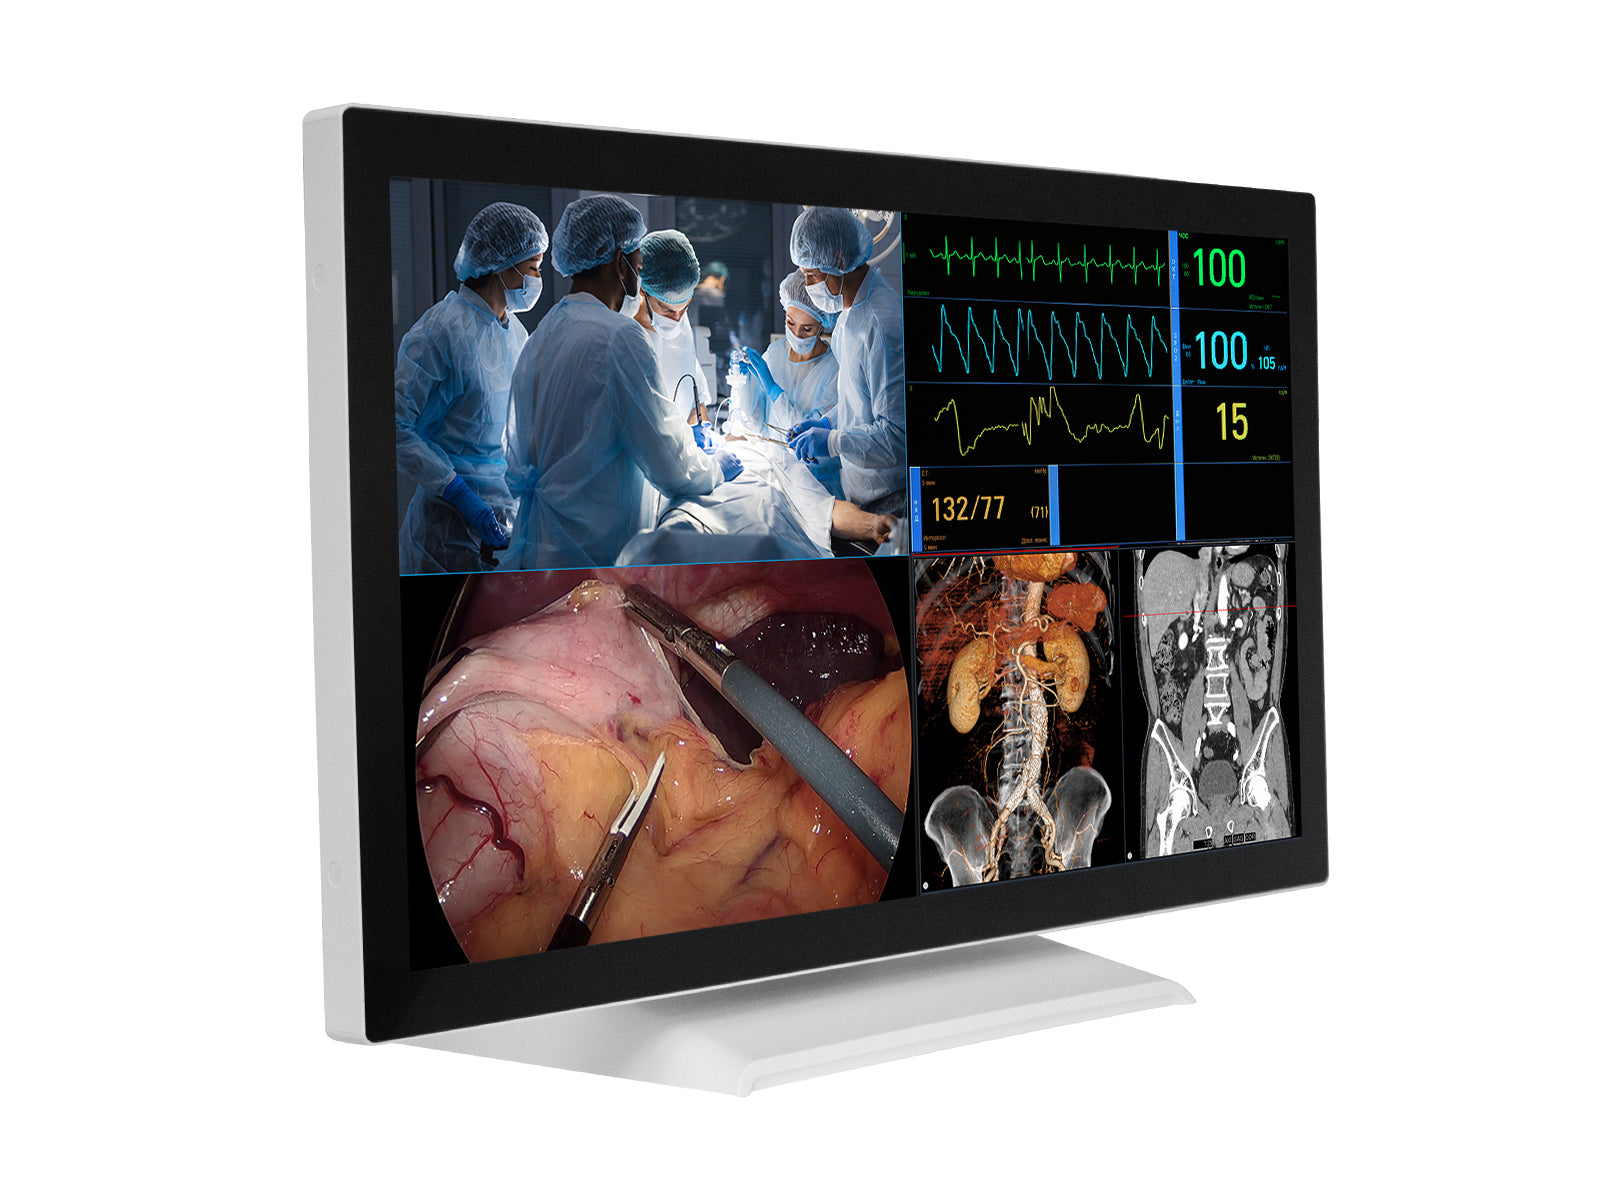 Barco AMM 215WTTP 21.5” Full HD Touchscreen Color Clinical Review Display Monitor (215ETTWZA)